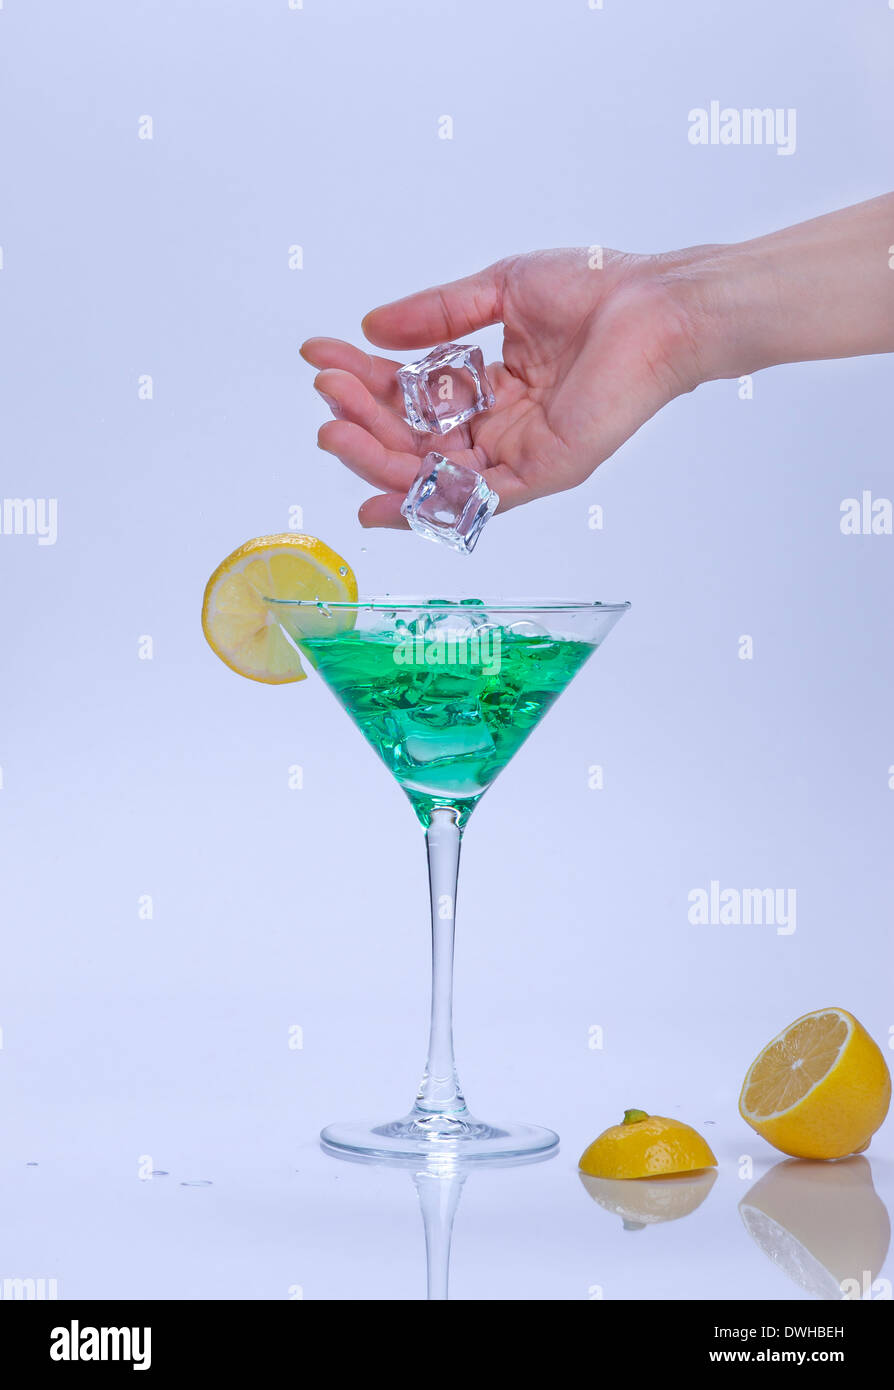 Dropping ice into cocktail. Stock Photo